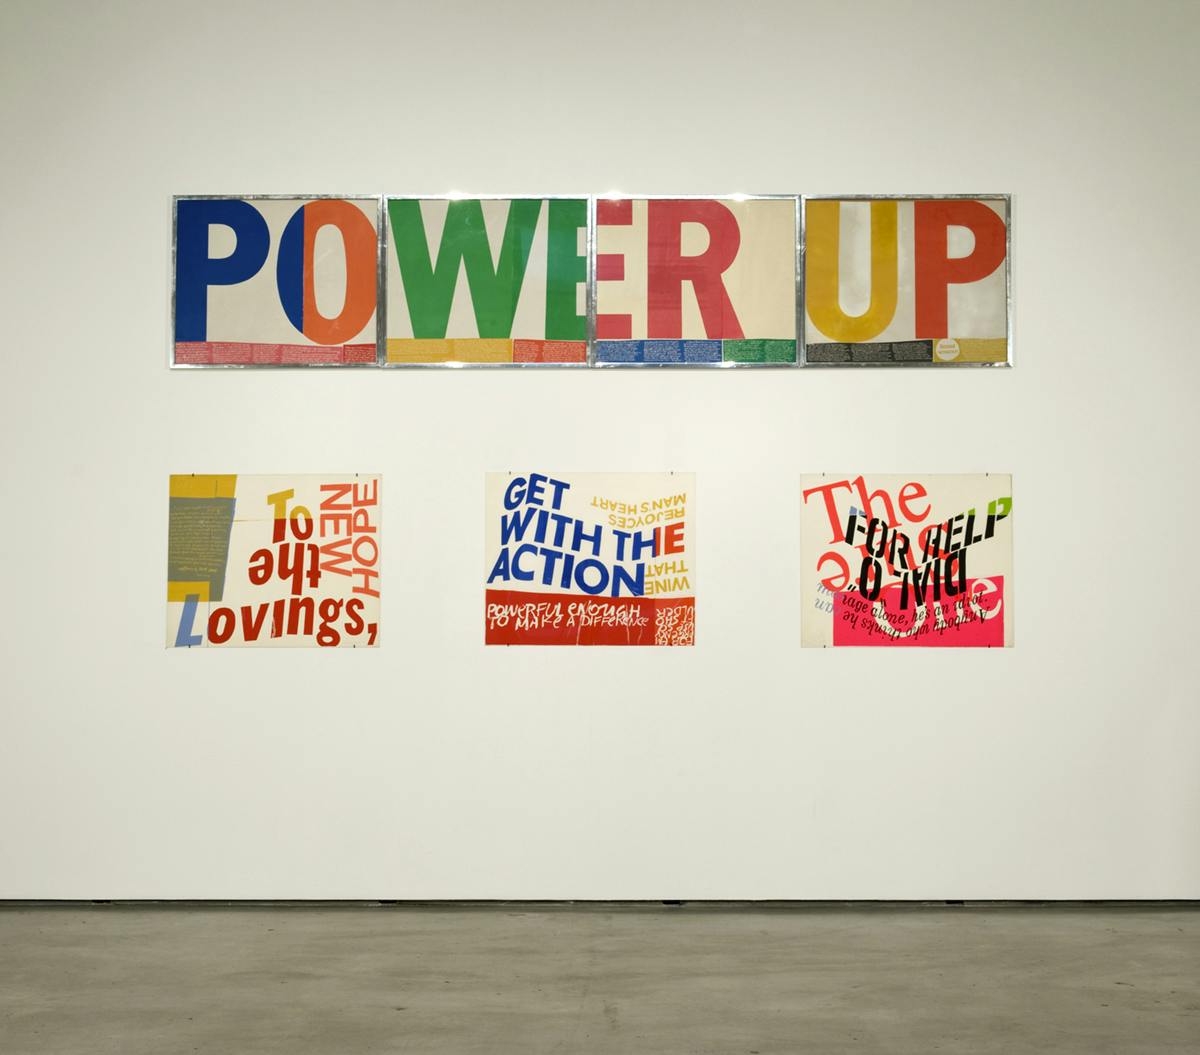 On a white gallery wall, a silver-framed colourful sign which reads “POWER UP” is mounted on the top. Below it, three other signs are mounted. One of them reads “GET WITH THE ACTION.”